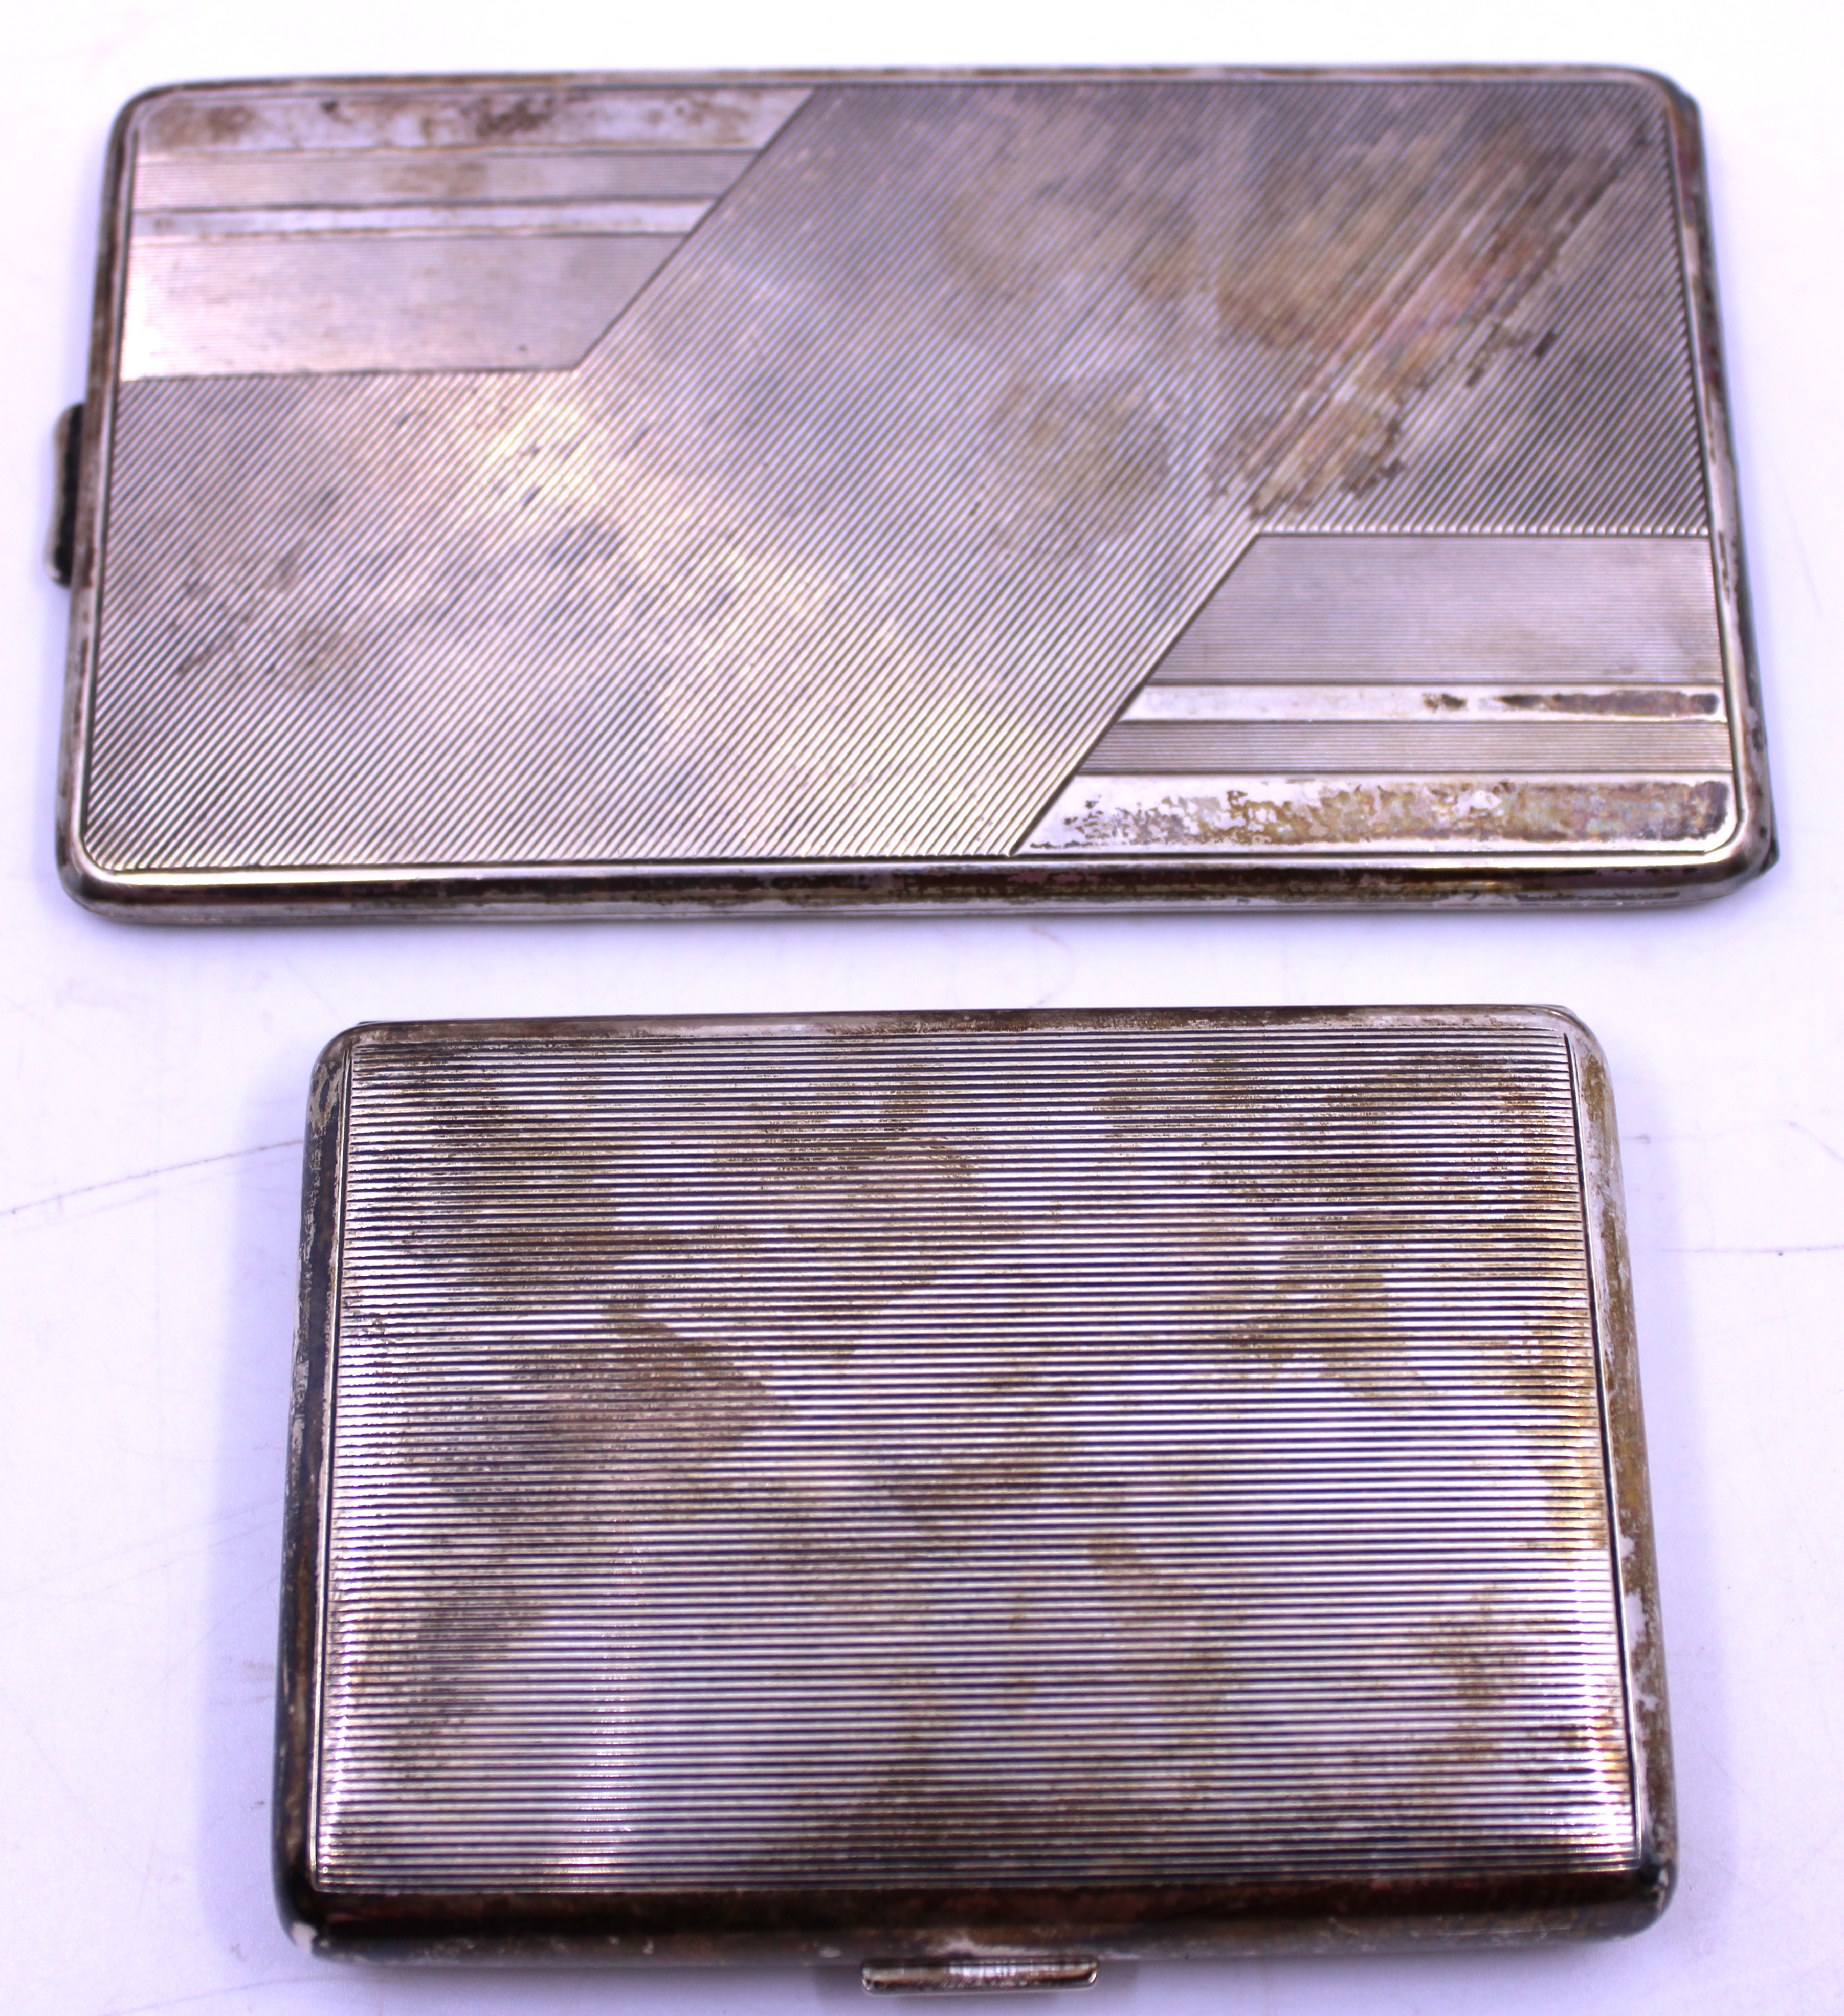 Two Norwegian Silver Cigaratte Cases.  One of the Cigarette Cases is marked "T.K 830 S" and is